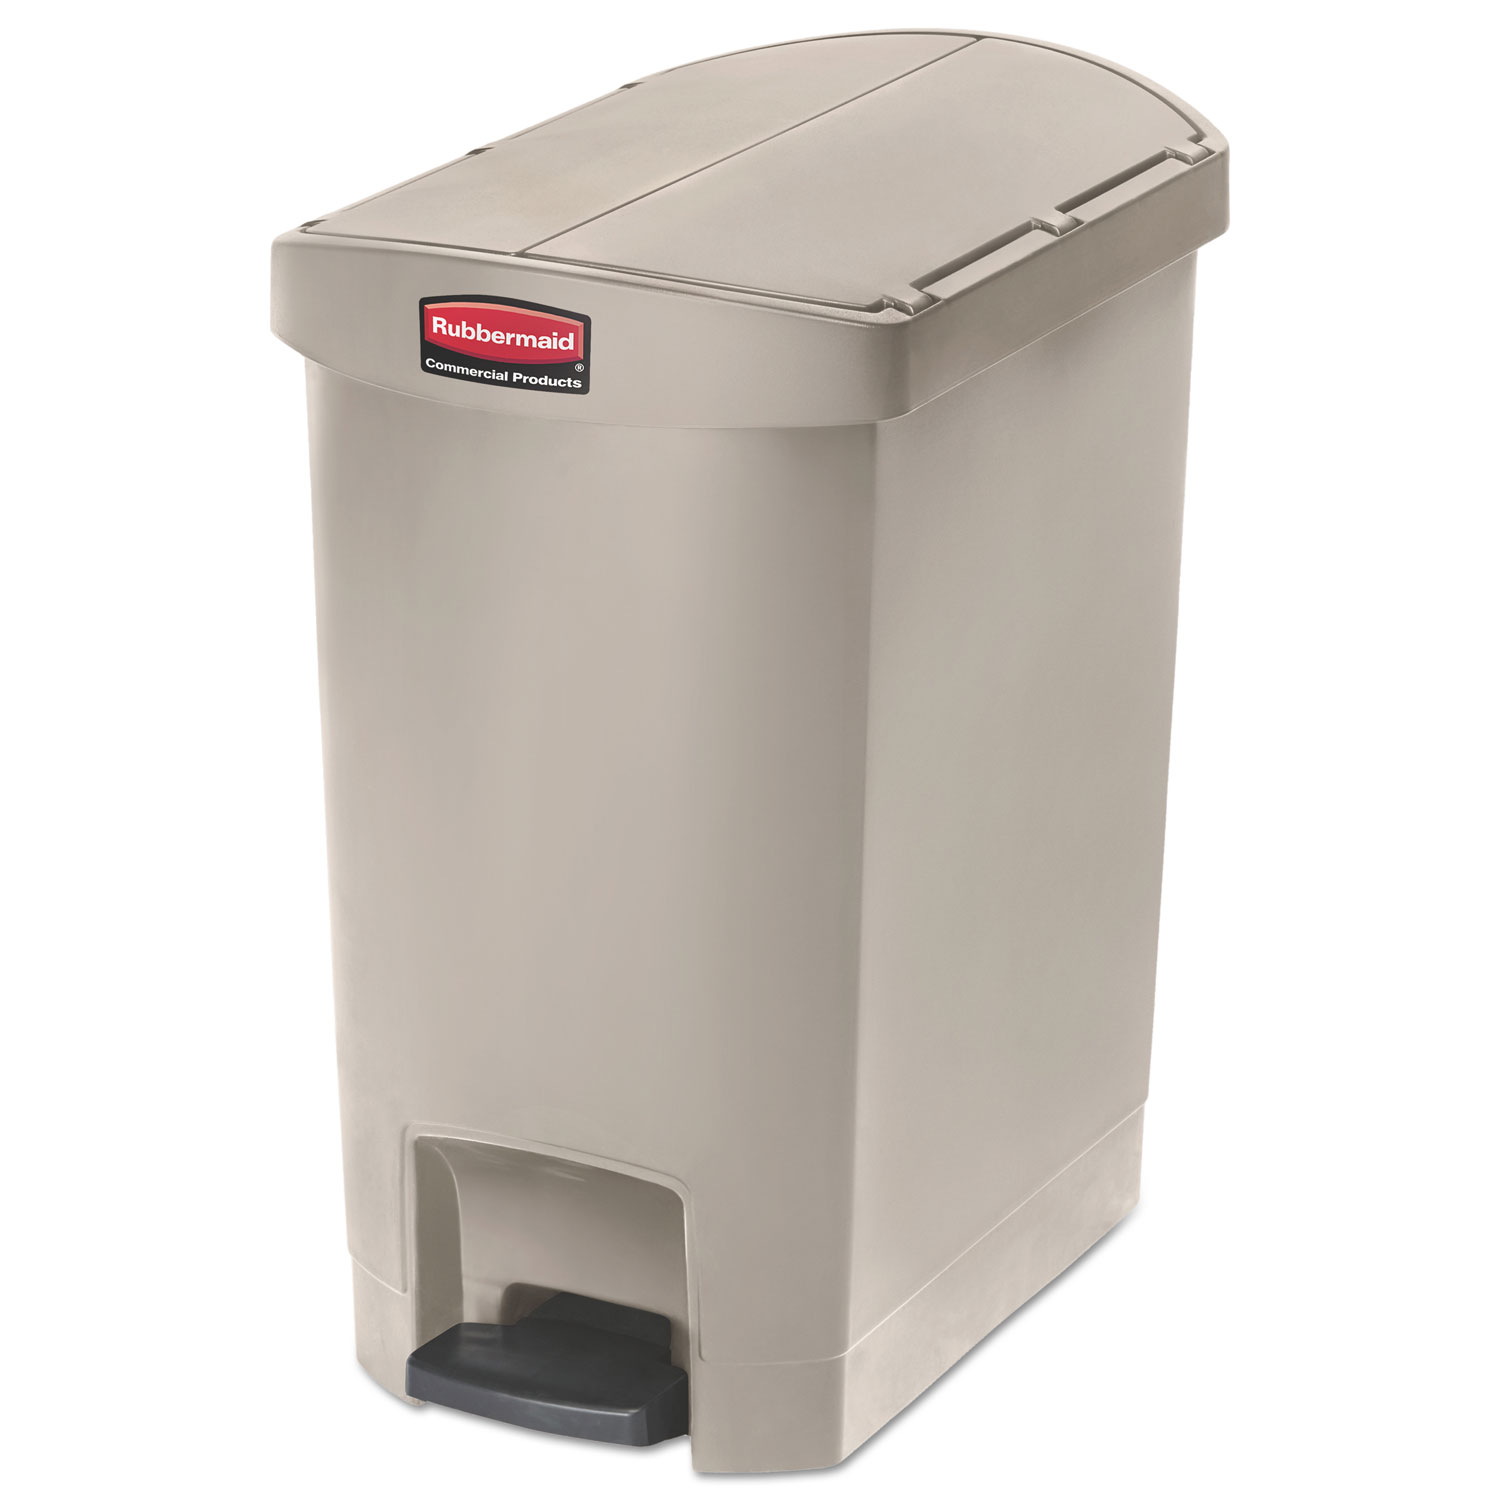  Rubbermaid Commercial 1883457 Slim Jim Resin Step-On Container, End Step Style, 8 gal, Beige (RCP1883457) 